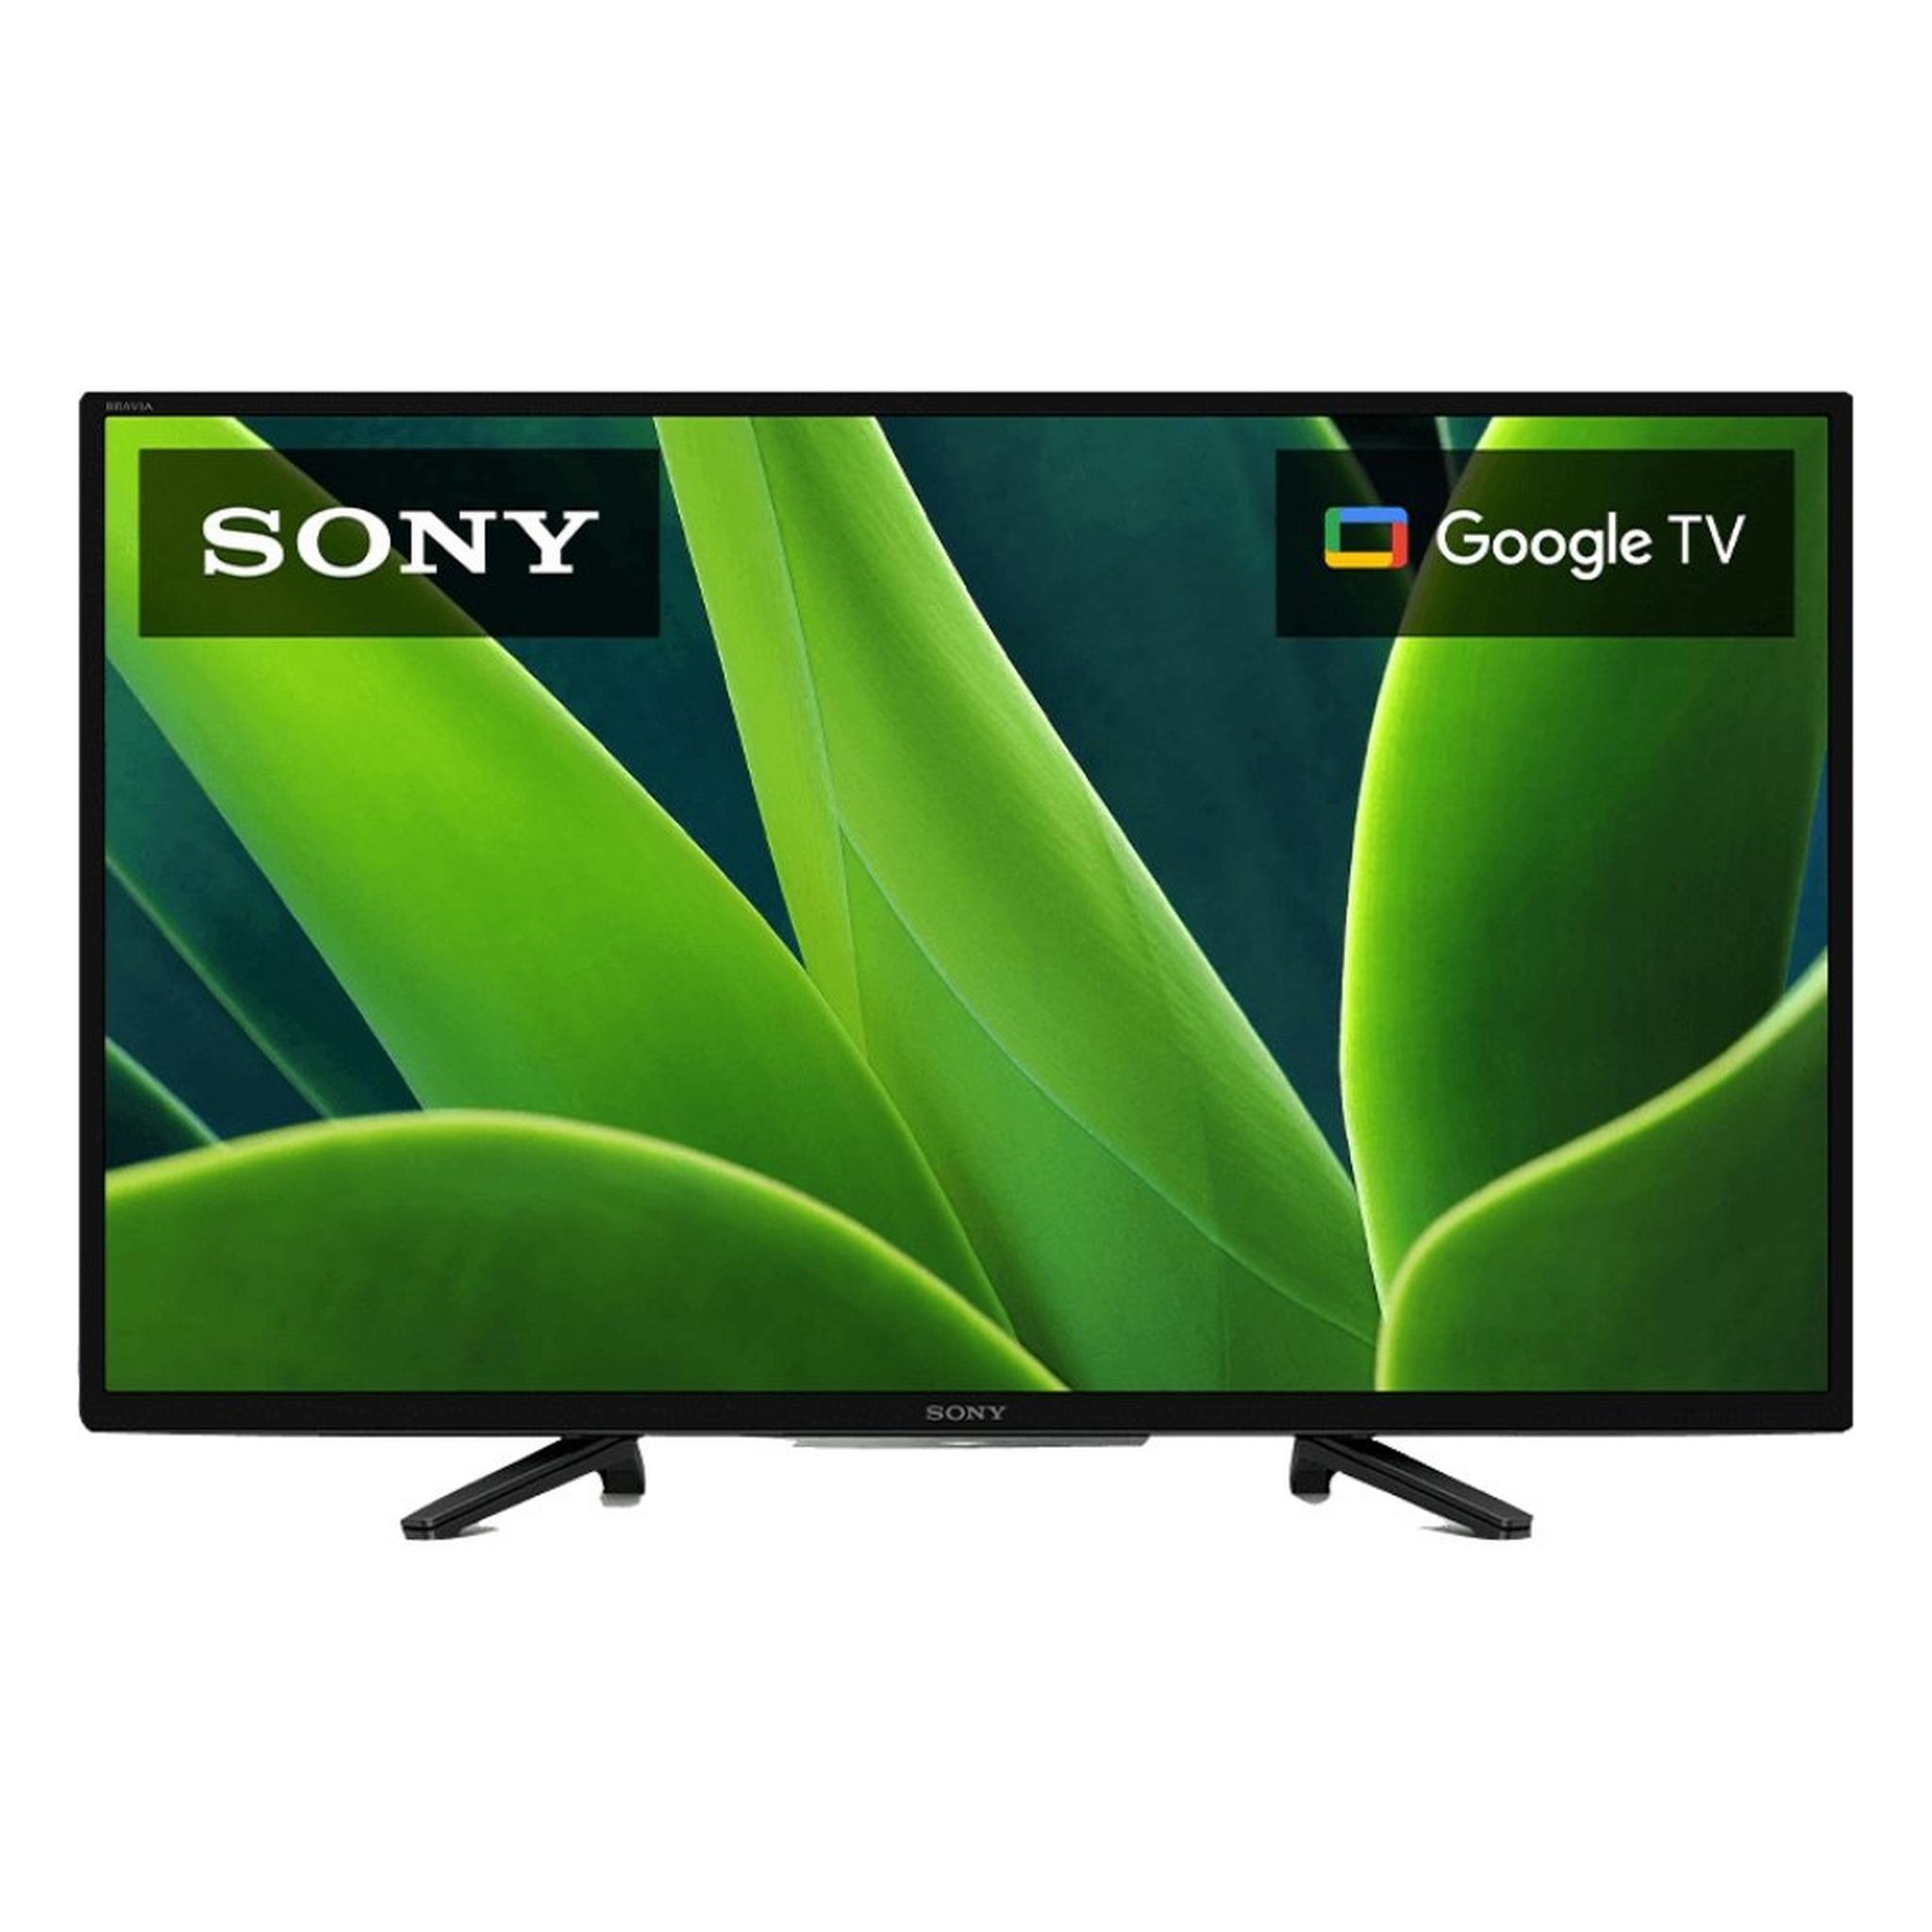 Sony Smart TV 32 inch Android LED 720p HDR (KD-32W830K)